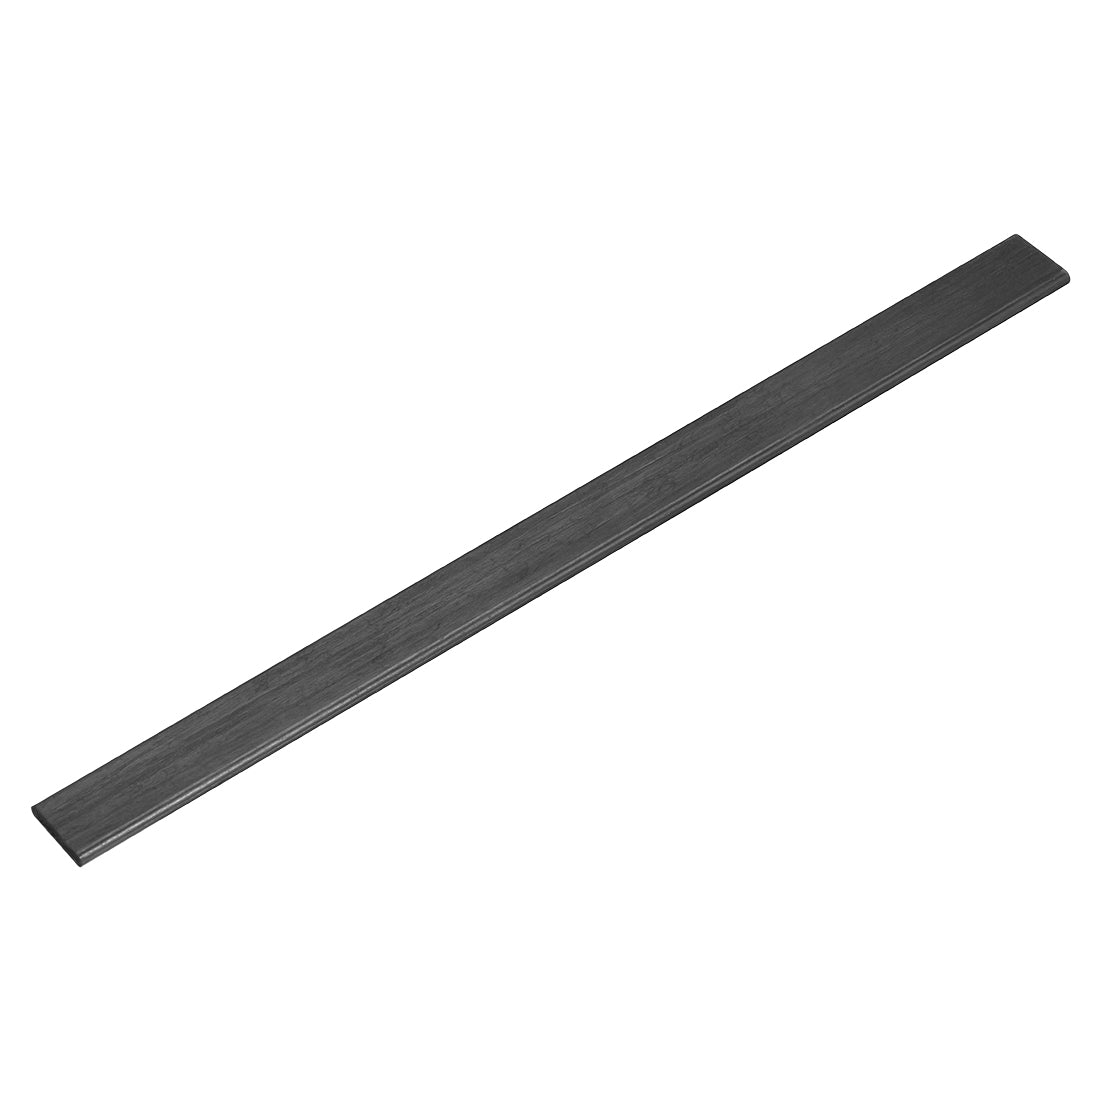 uxcell Uxcell Carbon Fiber Strip Bars 3x15mm 600mm Length Pultruded Carbon Fiber Strips for Kites, RC Airplane 1 Pcs